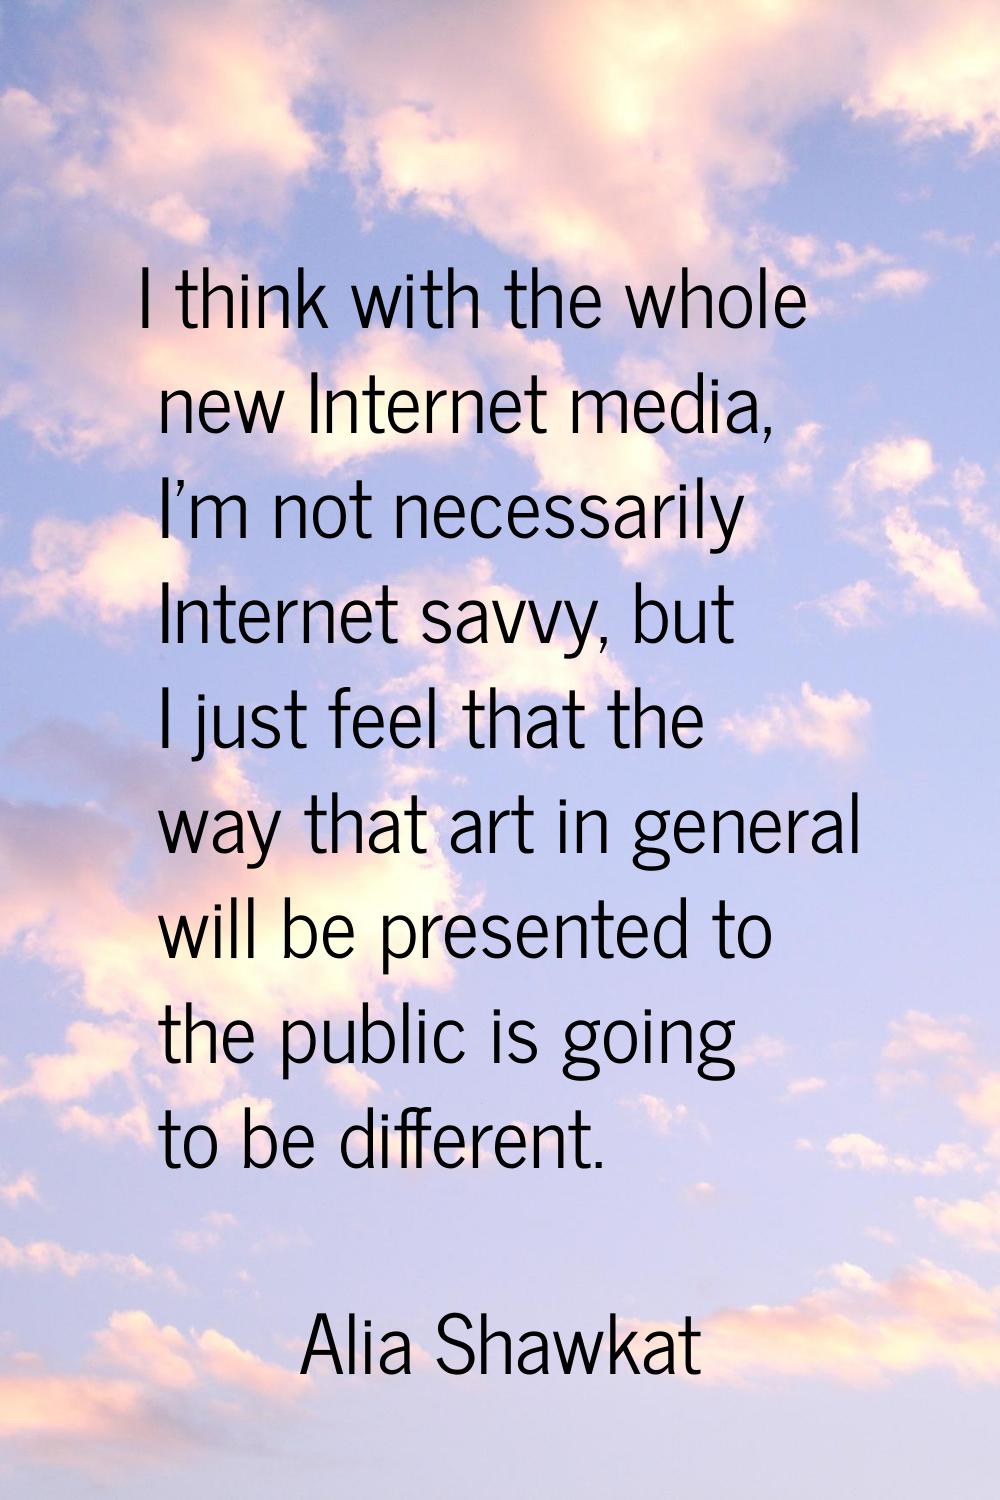 I think with the whole new Internet media, I'm not necessarily Internet savvy, but I just feel that